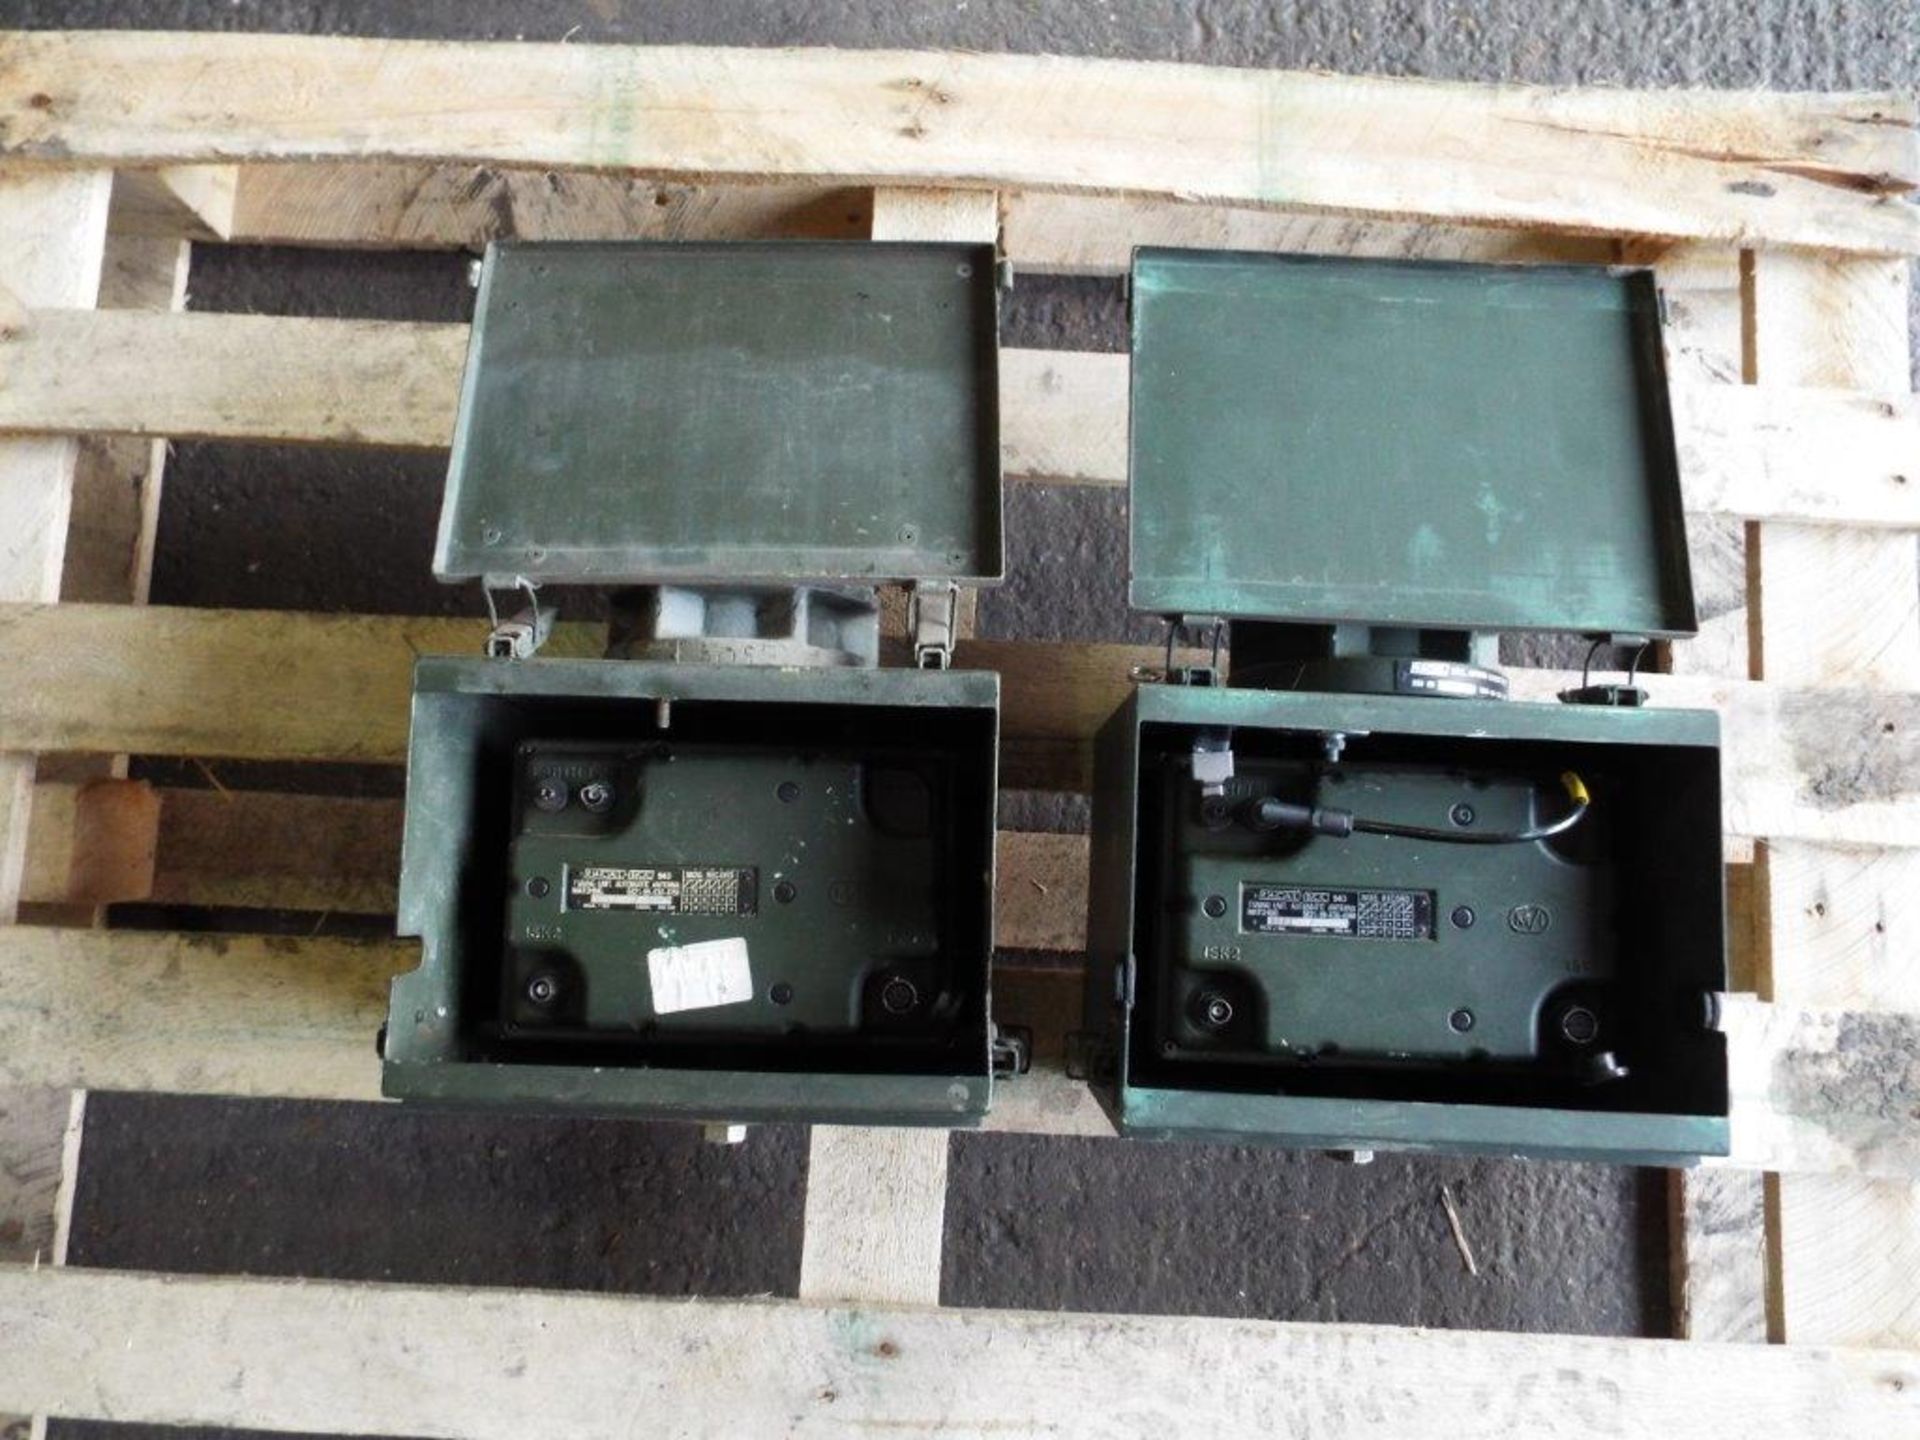 2 x Land Rover ATU Wing Boxes Complete with Aerial Bases and Tuaam's - Bild 4 aus 8